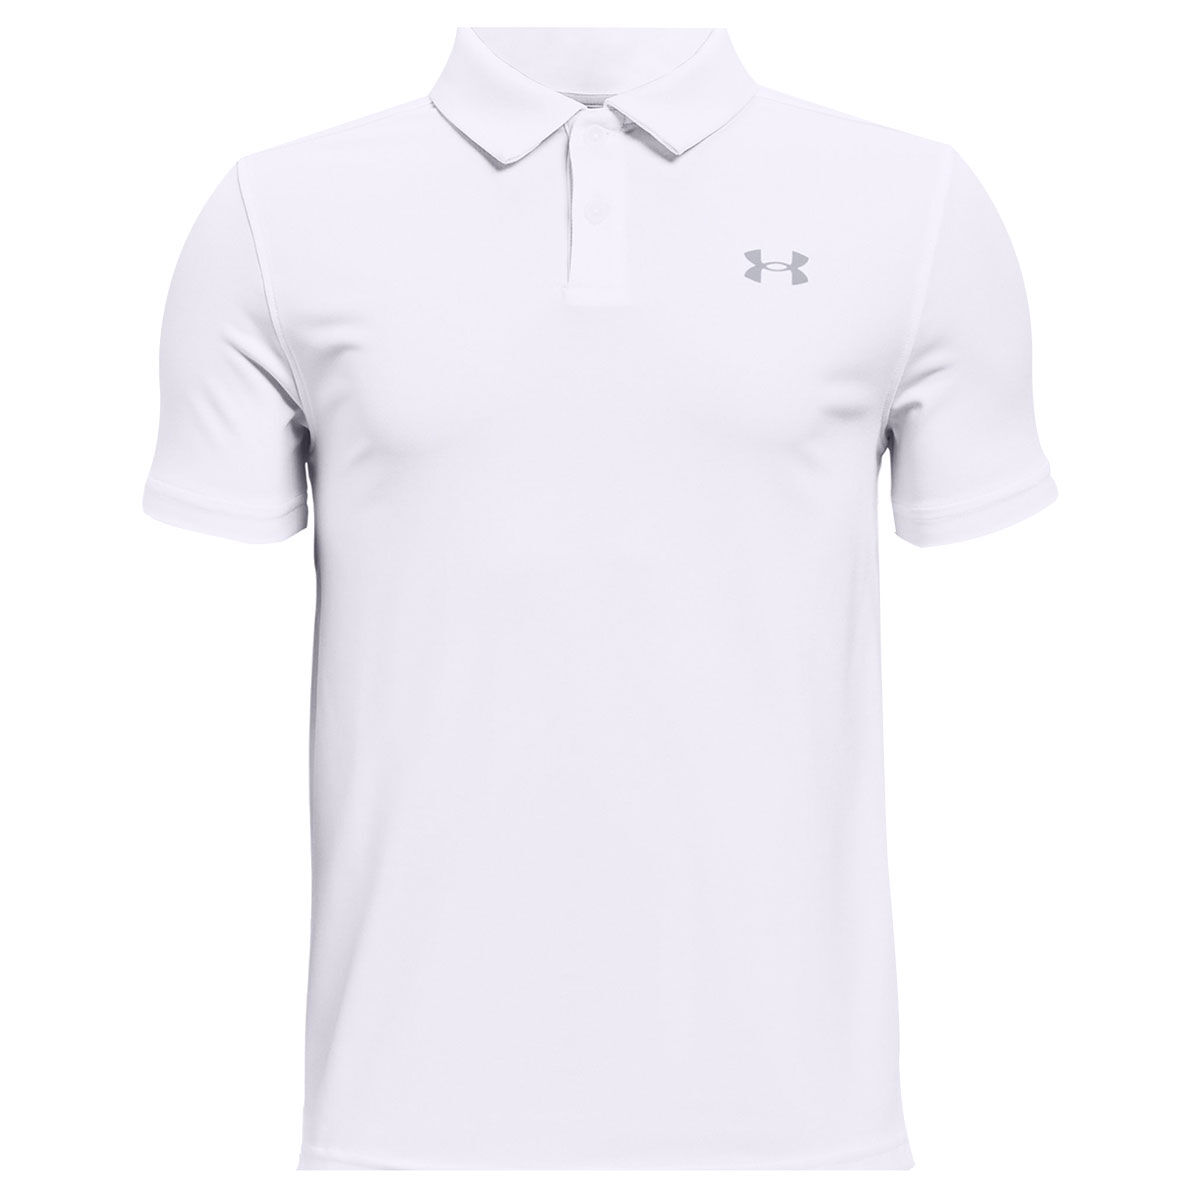 Image of Under Armour Junior Polo-Shirt Performance Unisex White/grey/grey 12-13 years | Online Golf